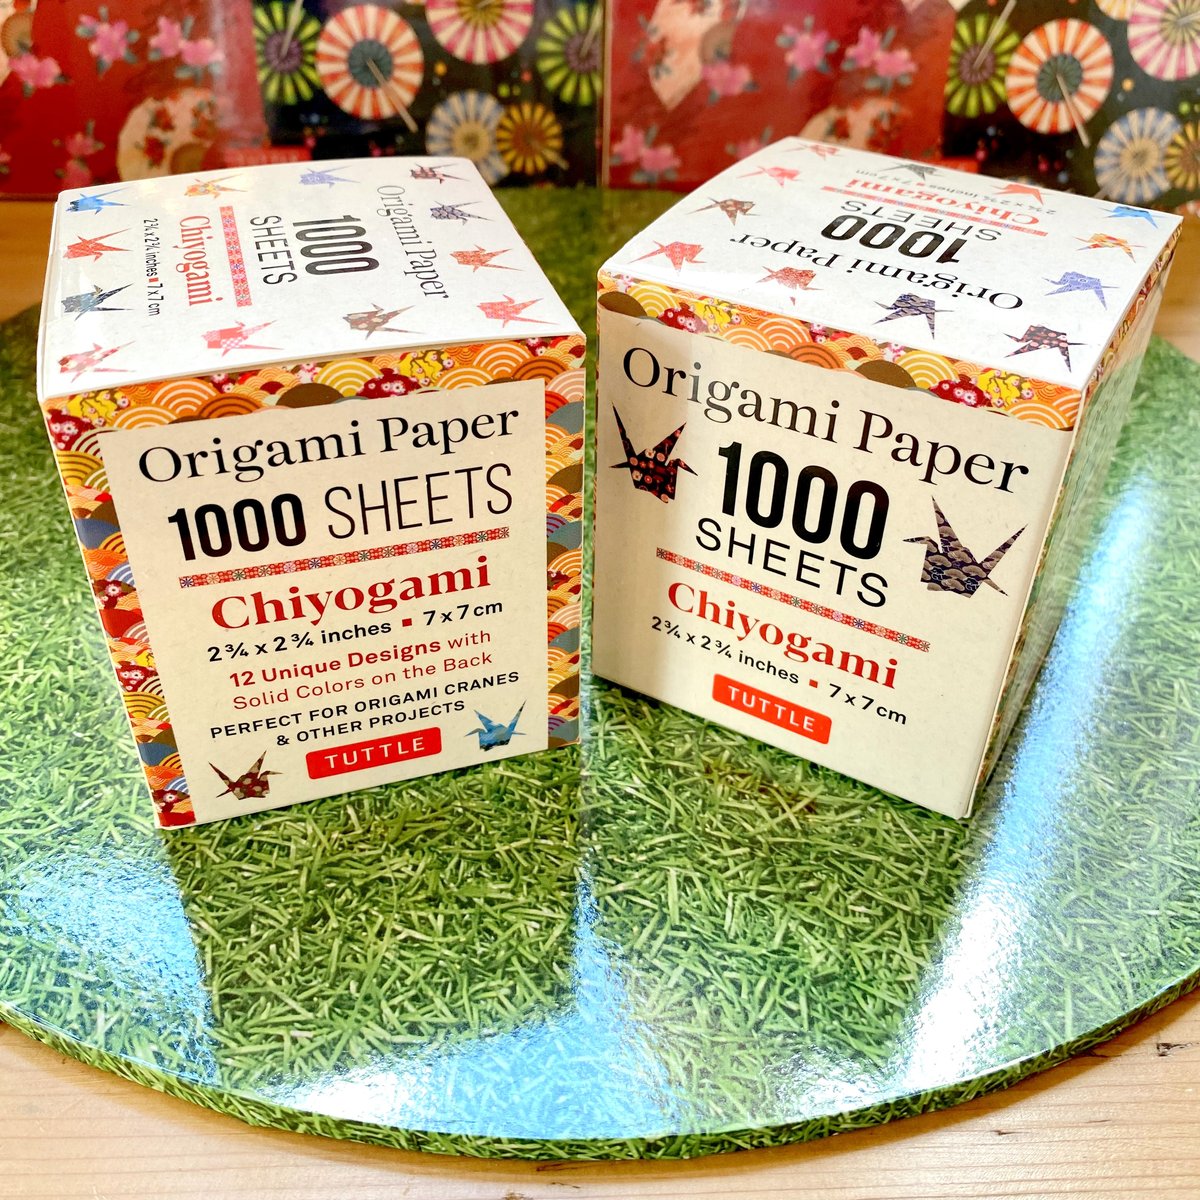 Image of Origami Paper - Chiyogami 1,000 sheets